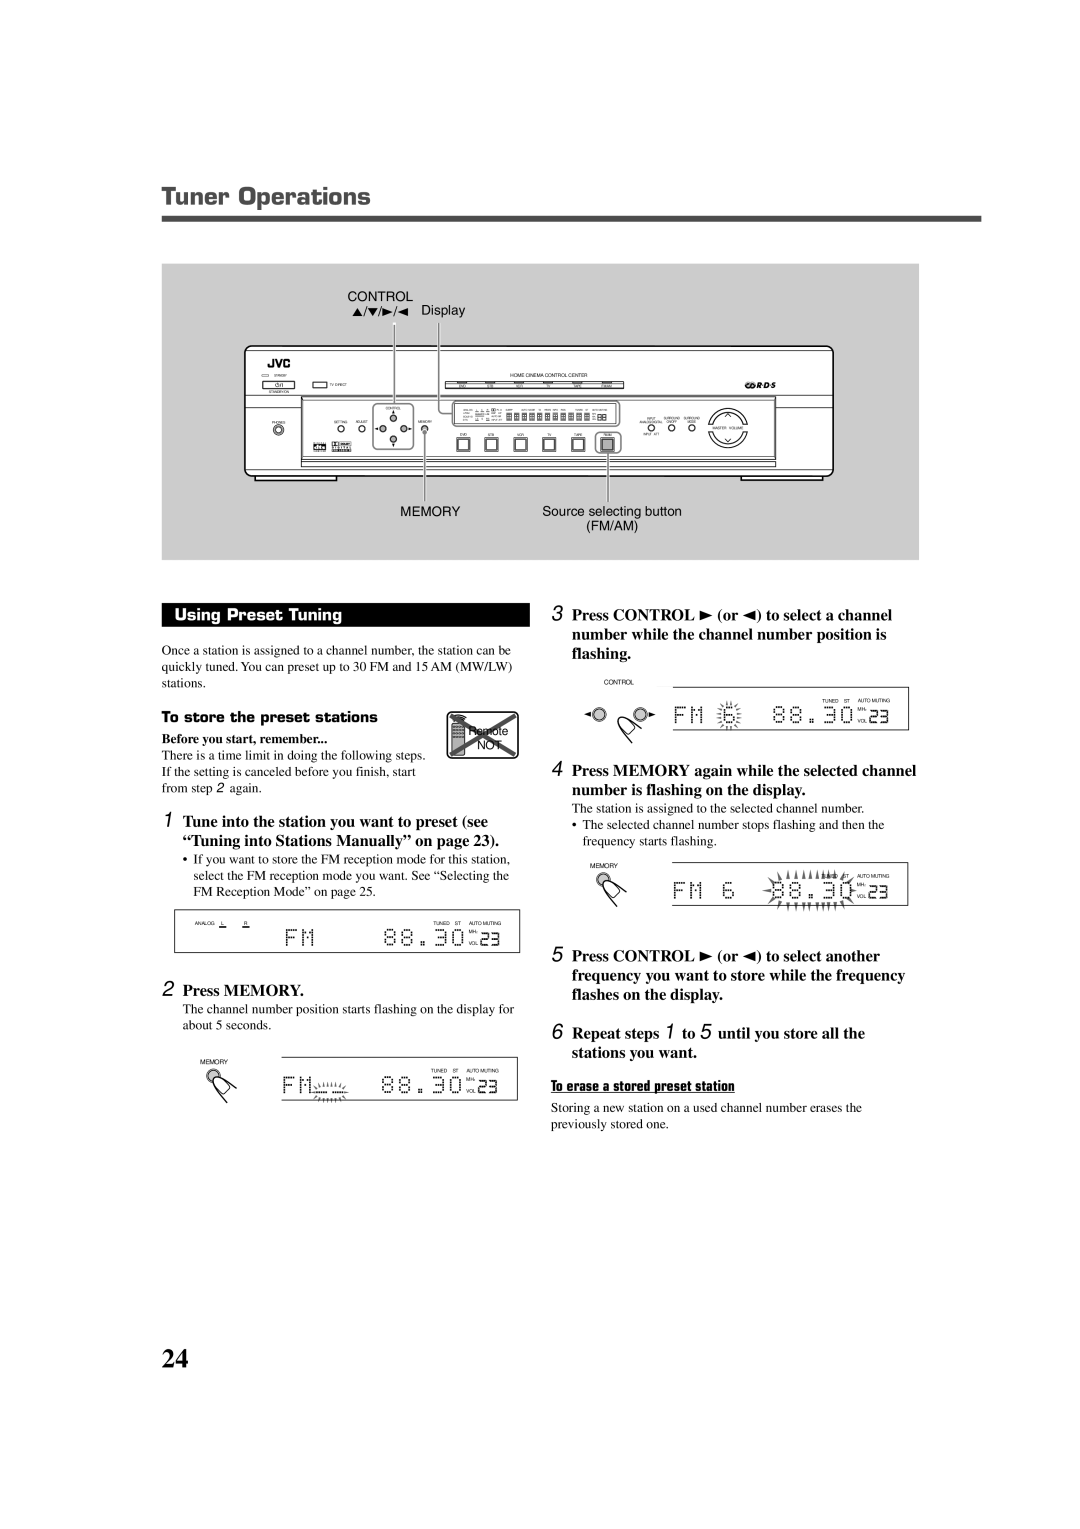 JVC LVT0858-001A manual Tuner Operations, Using Preset Tuning, Press Memory, To erase a stored preset station 